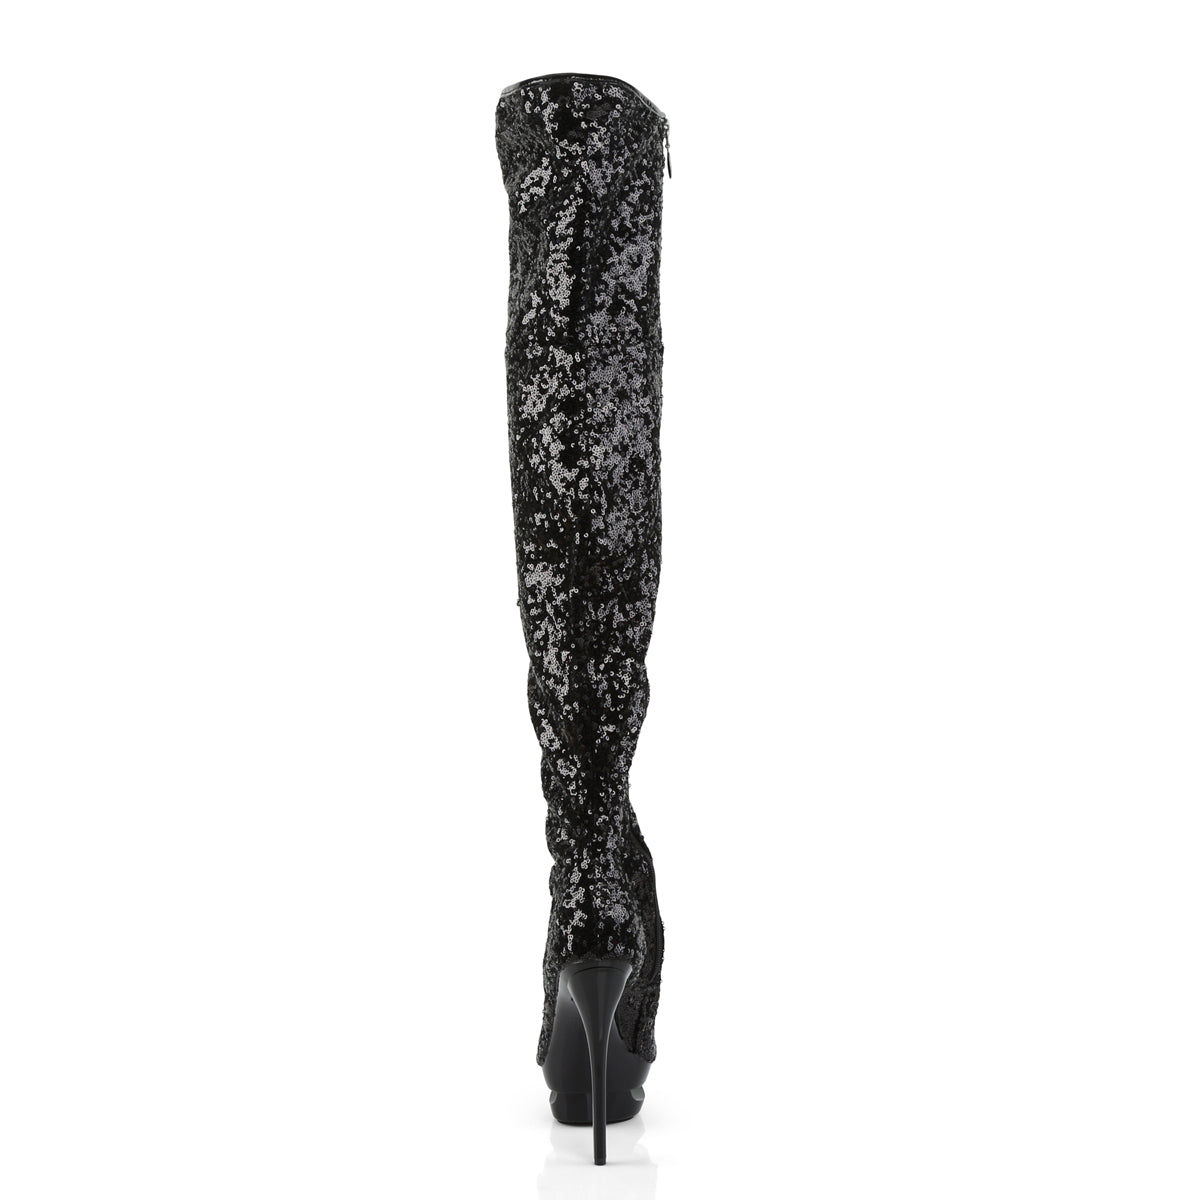 BLONDIE-R-3011 Sexy 6 Inch Black Sequins Pole Dancing Shoes-Pleaser- Sexy Shoes Fetish Footwear